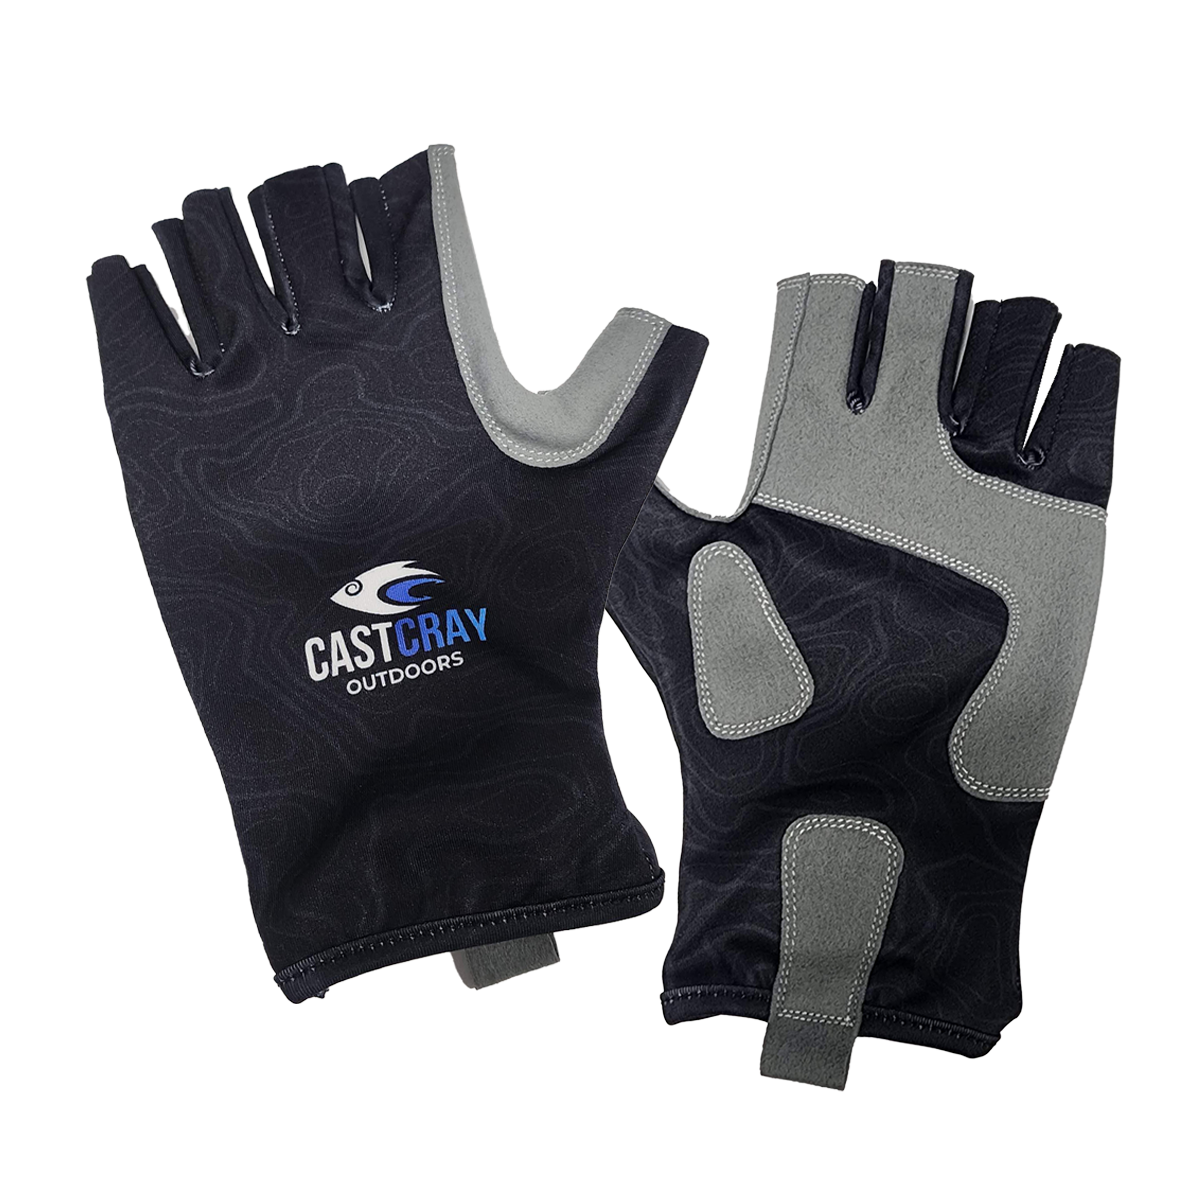 Cast Cray Fishing Gloves